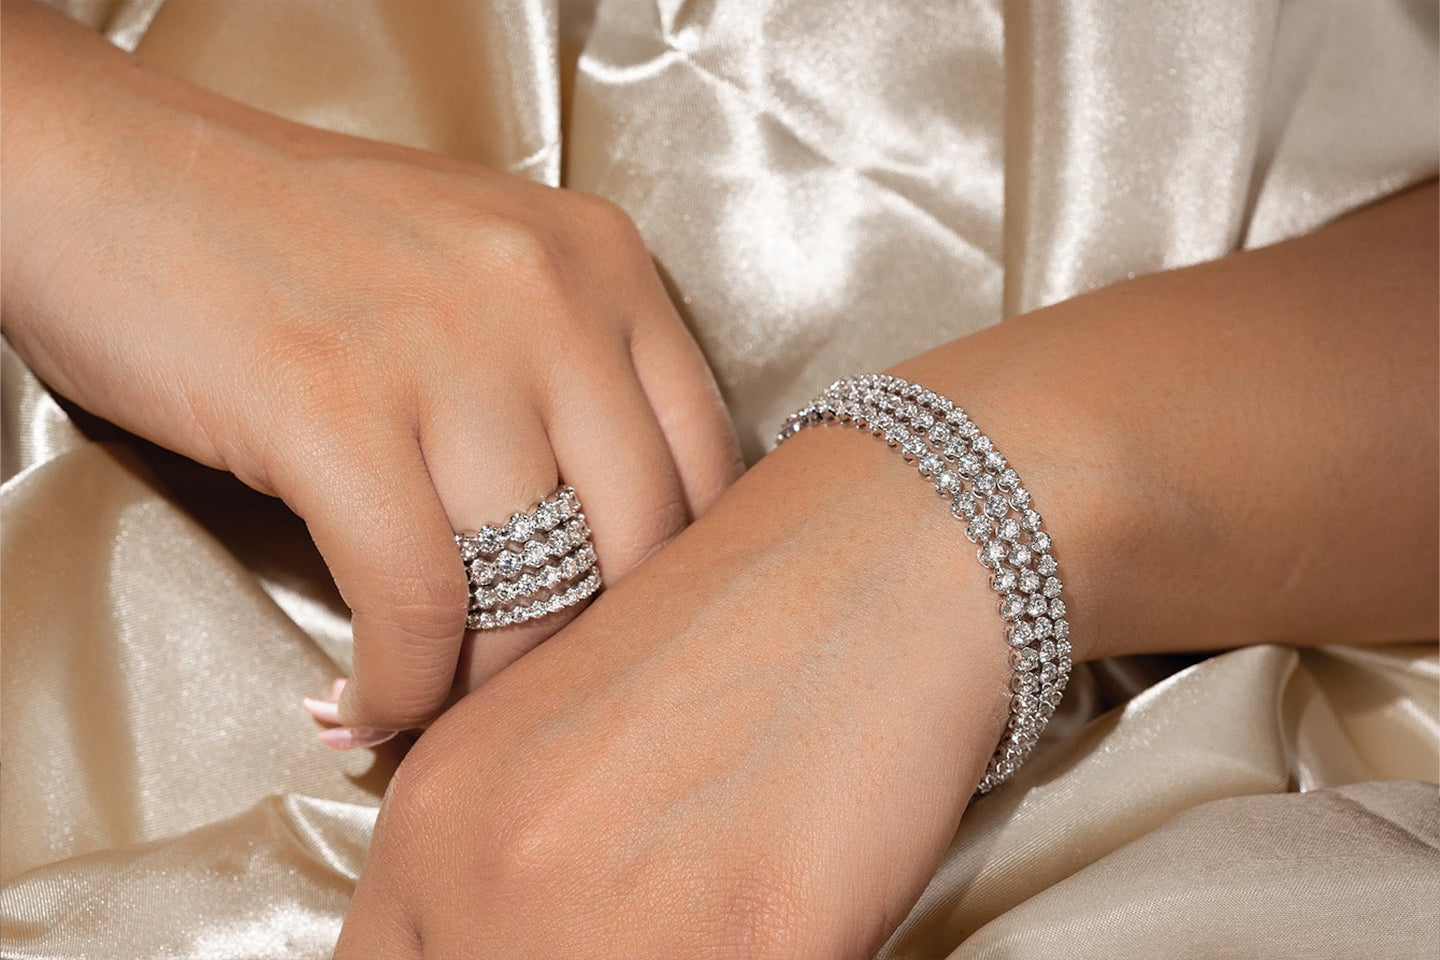 Coveted The Coveted Collection by MK Diamonds features, exquisitely crafted diamond eternity bands, earrings, pendants, and bracelets that will become symbolic representations of some of your most important experiences. For every Magnificent Moment.